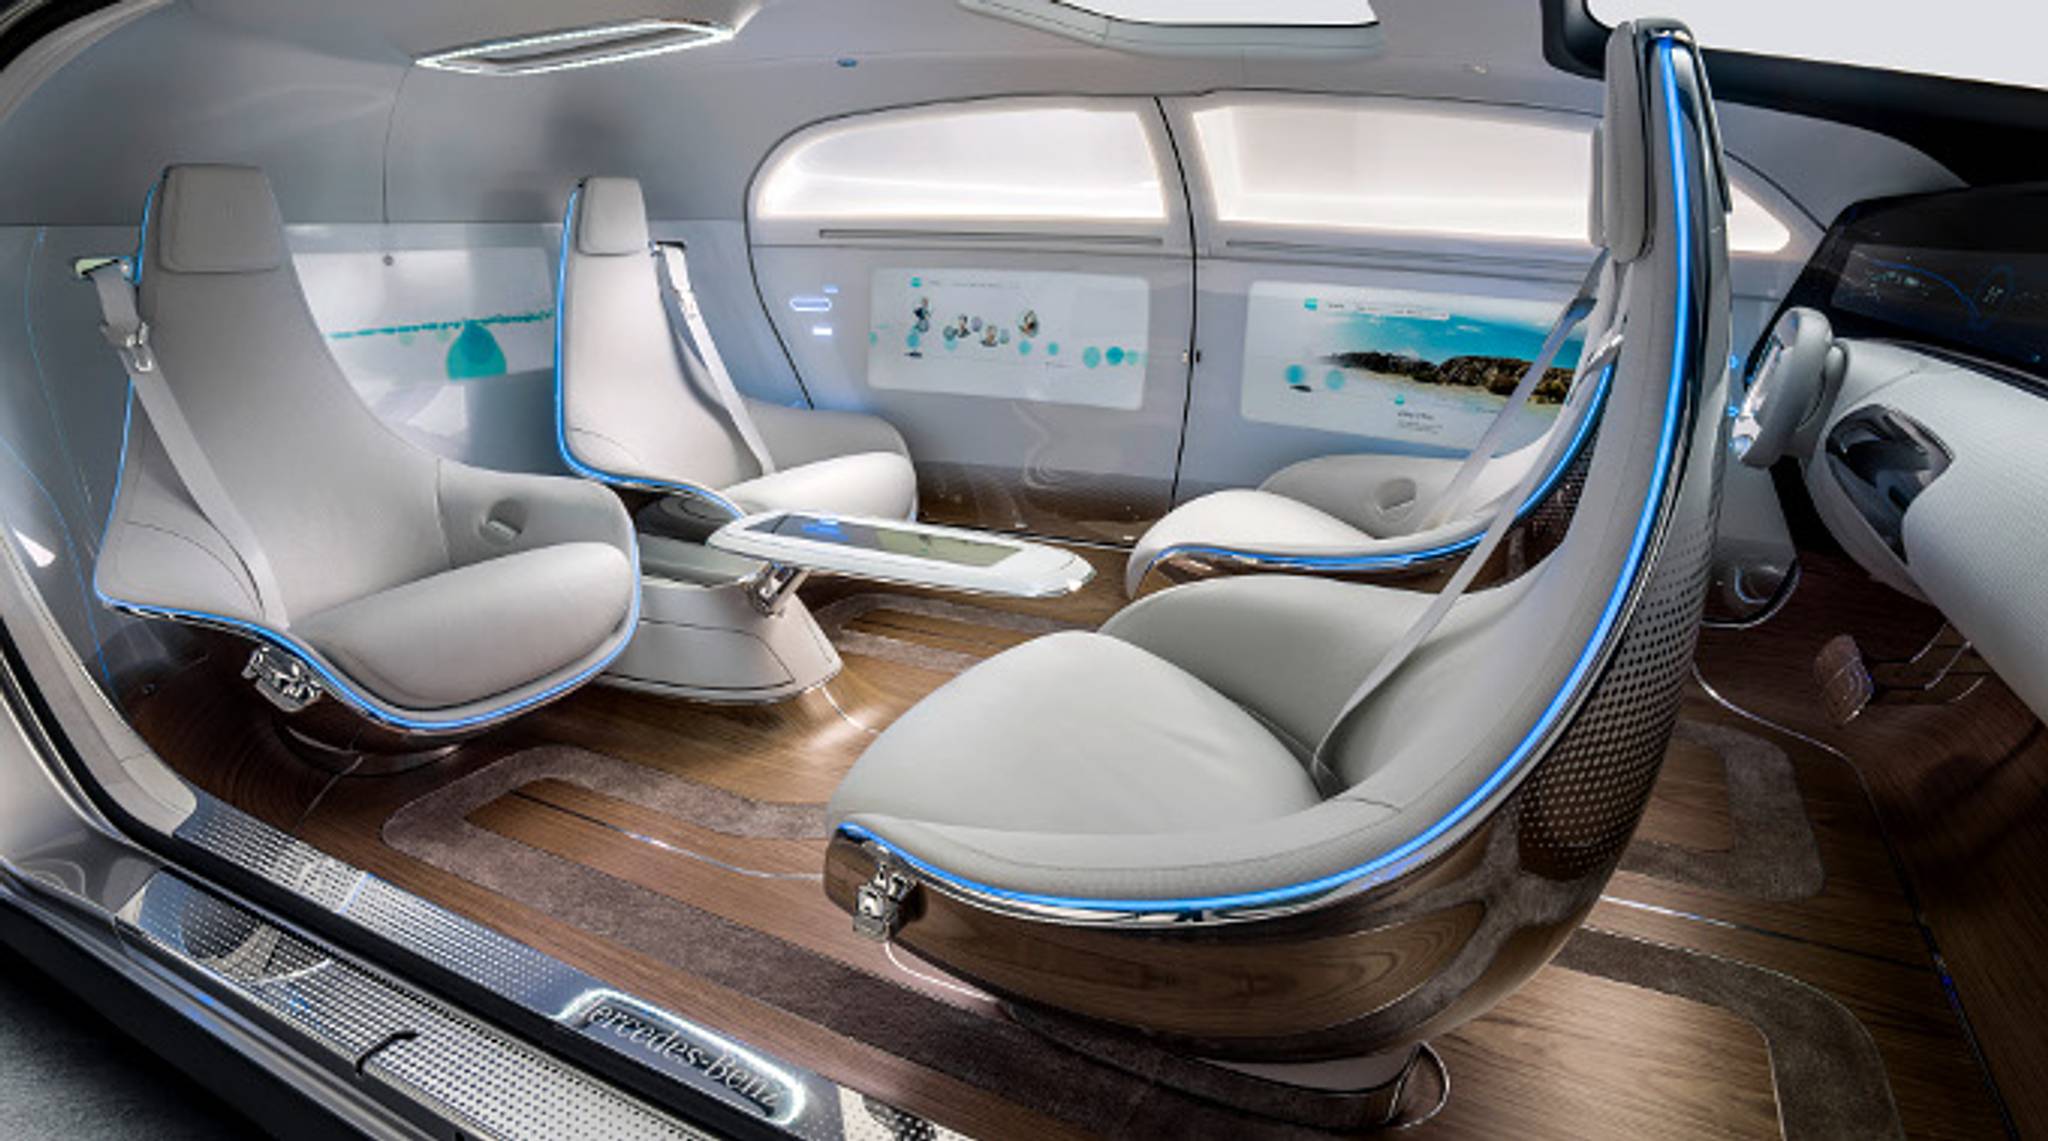 Mercedes imagines the car as a luxury lounge